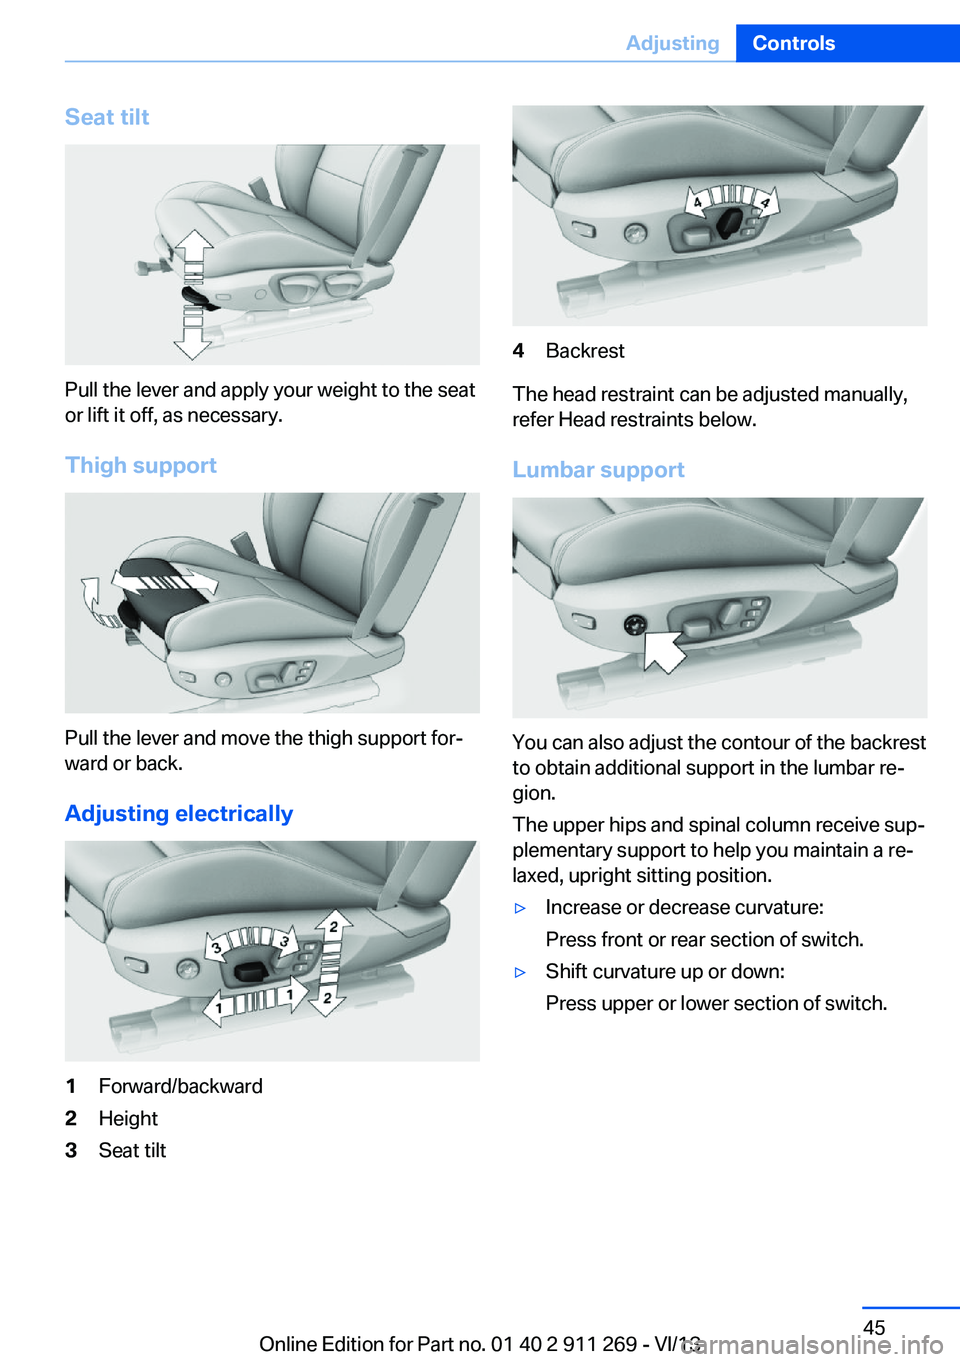 BMW X1 SDRIVE28I 2014 Service Manual Seat tilt
Pull the lever and apply your weight to the seat
or lift it off, as necessary.
Thigh support
Pull the lever and move the thigh support for‐
ward or back.
Adjusting electrically
1Forward/ba